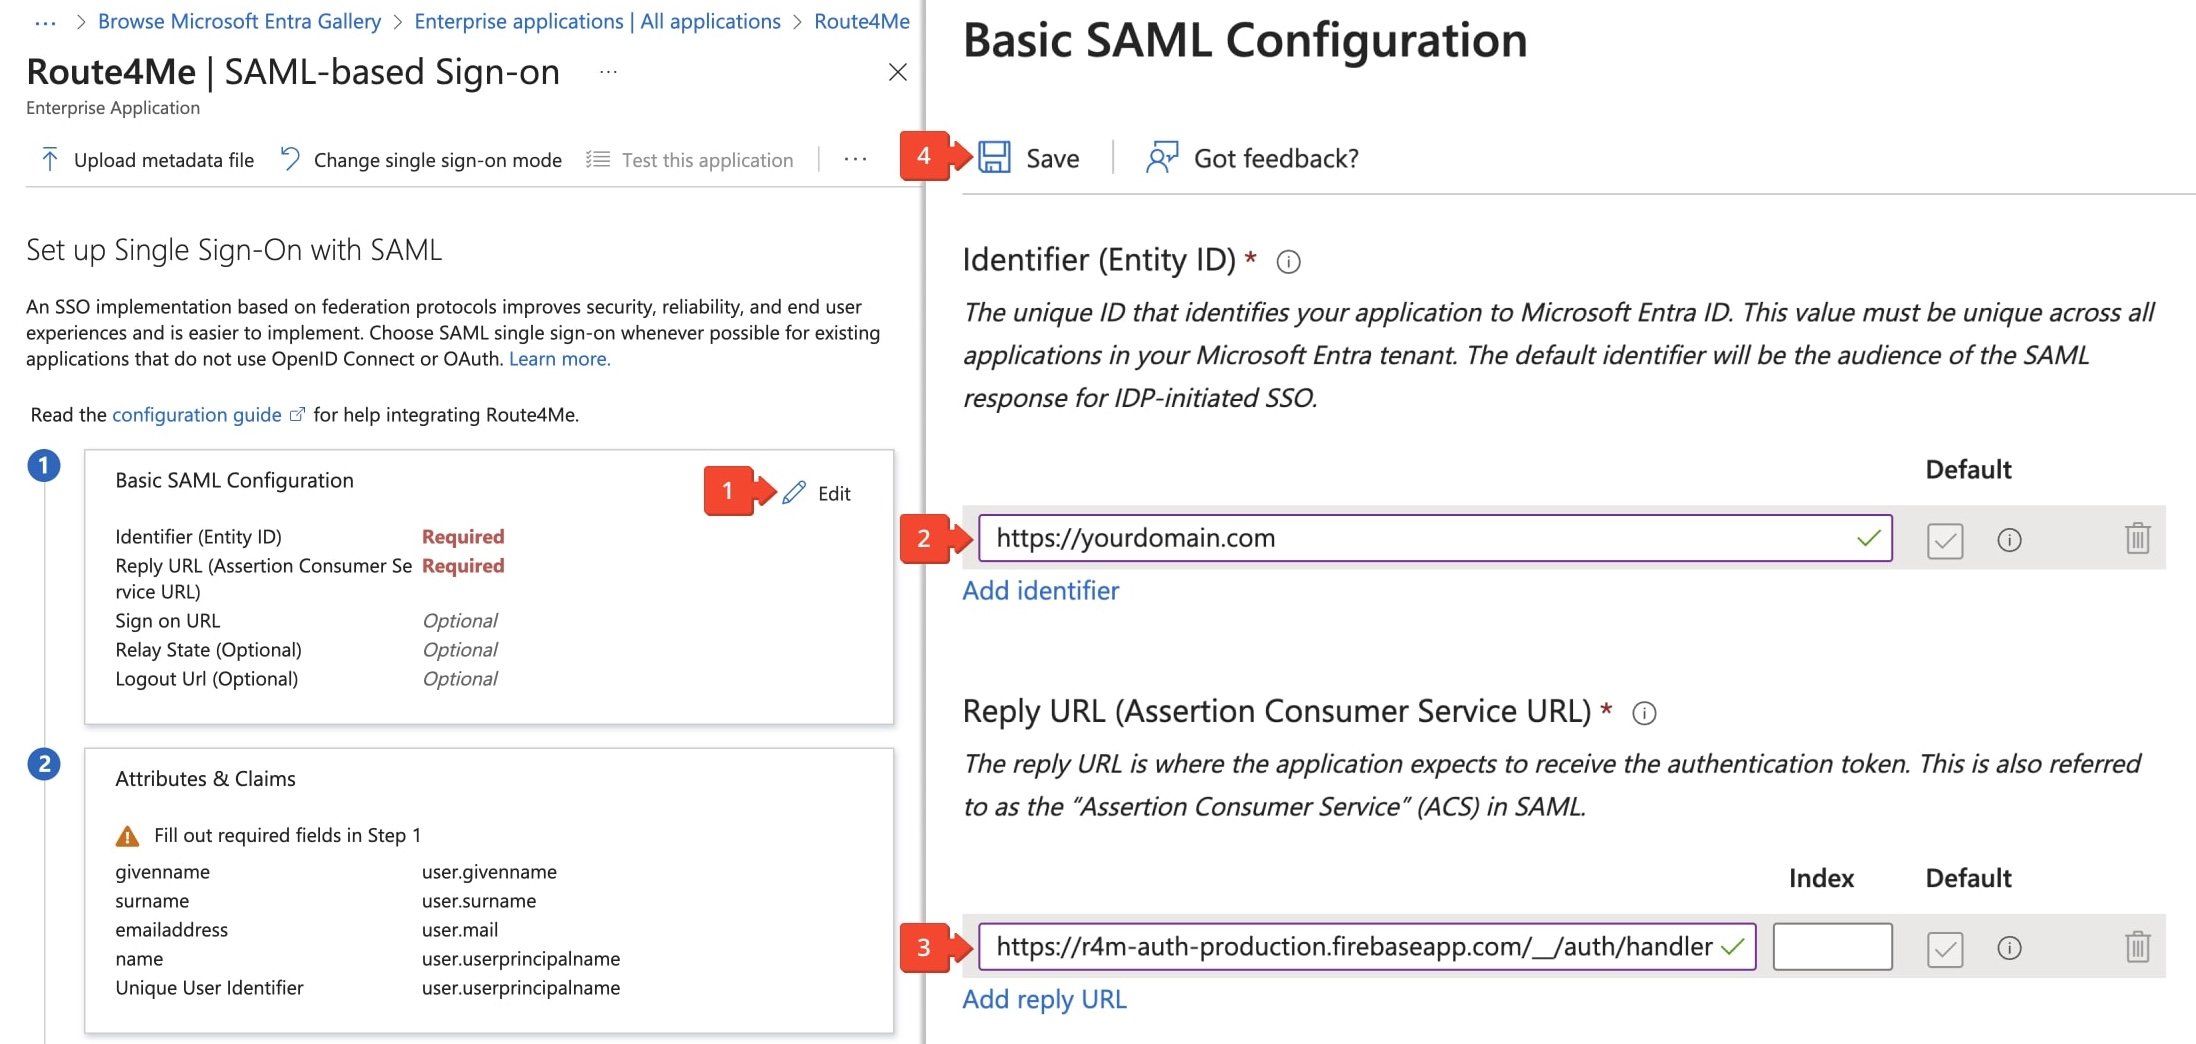 in the Set up Single Sign-On with SAML section, click the Edit button in the Basic SAML Configuration panel to set your basic SAML SSO settings.